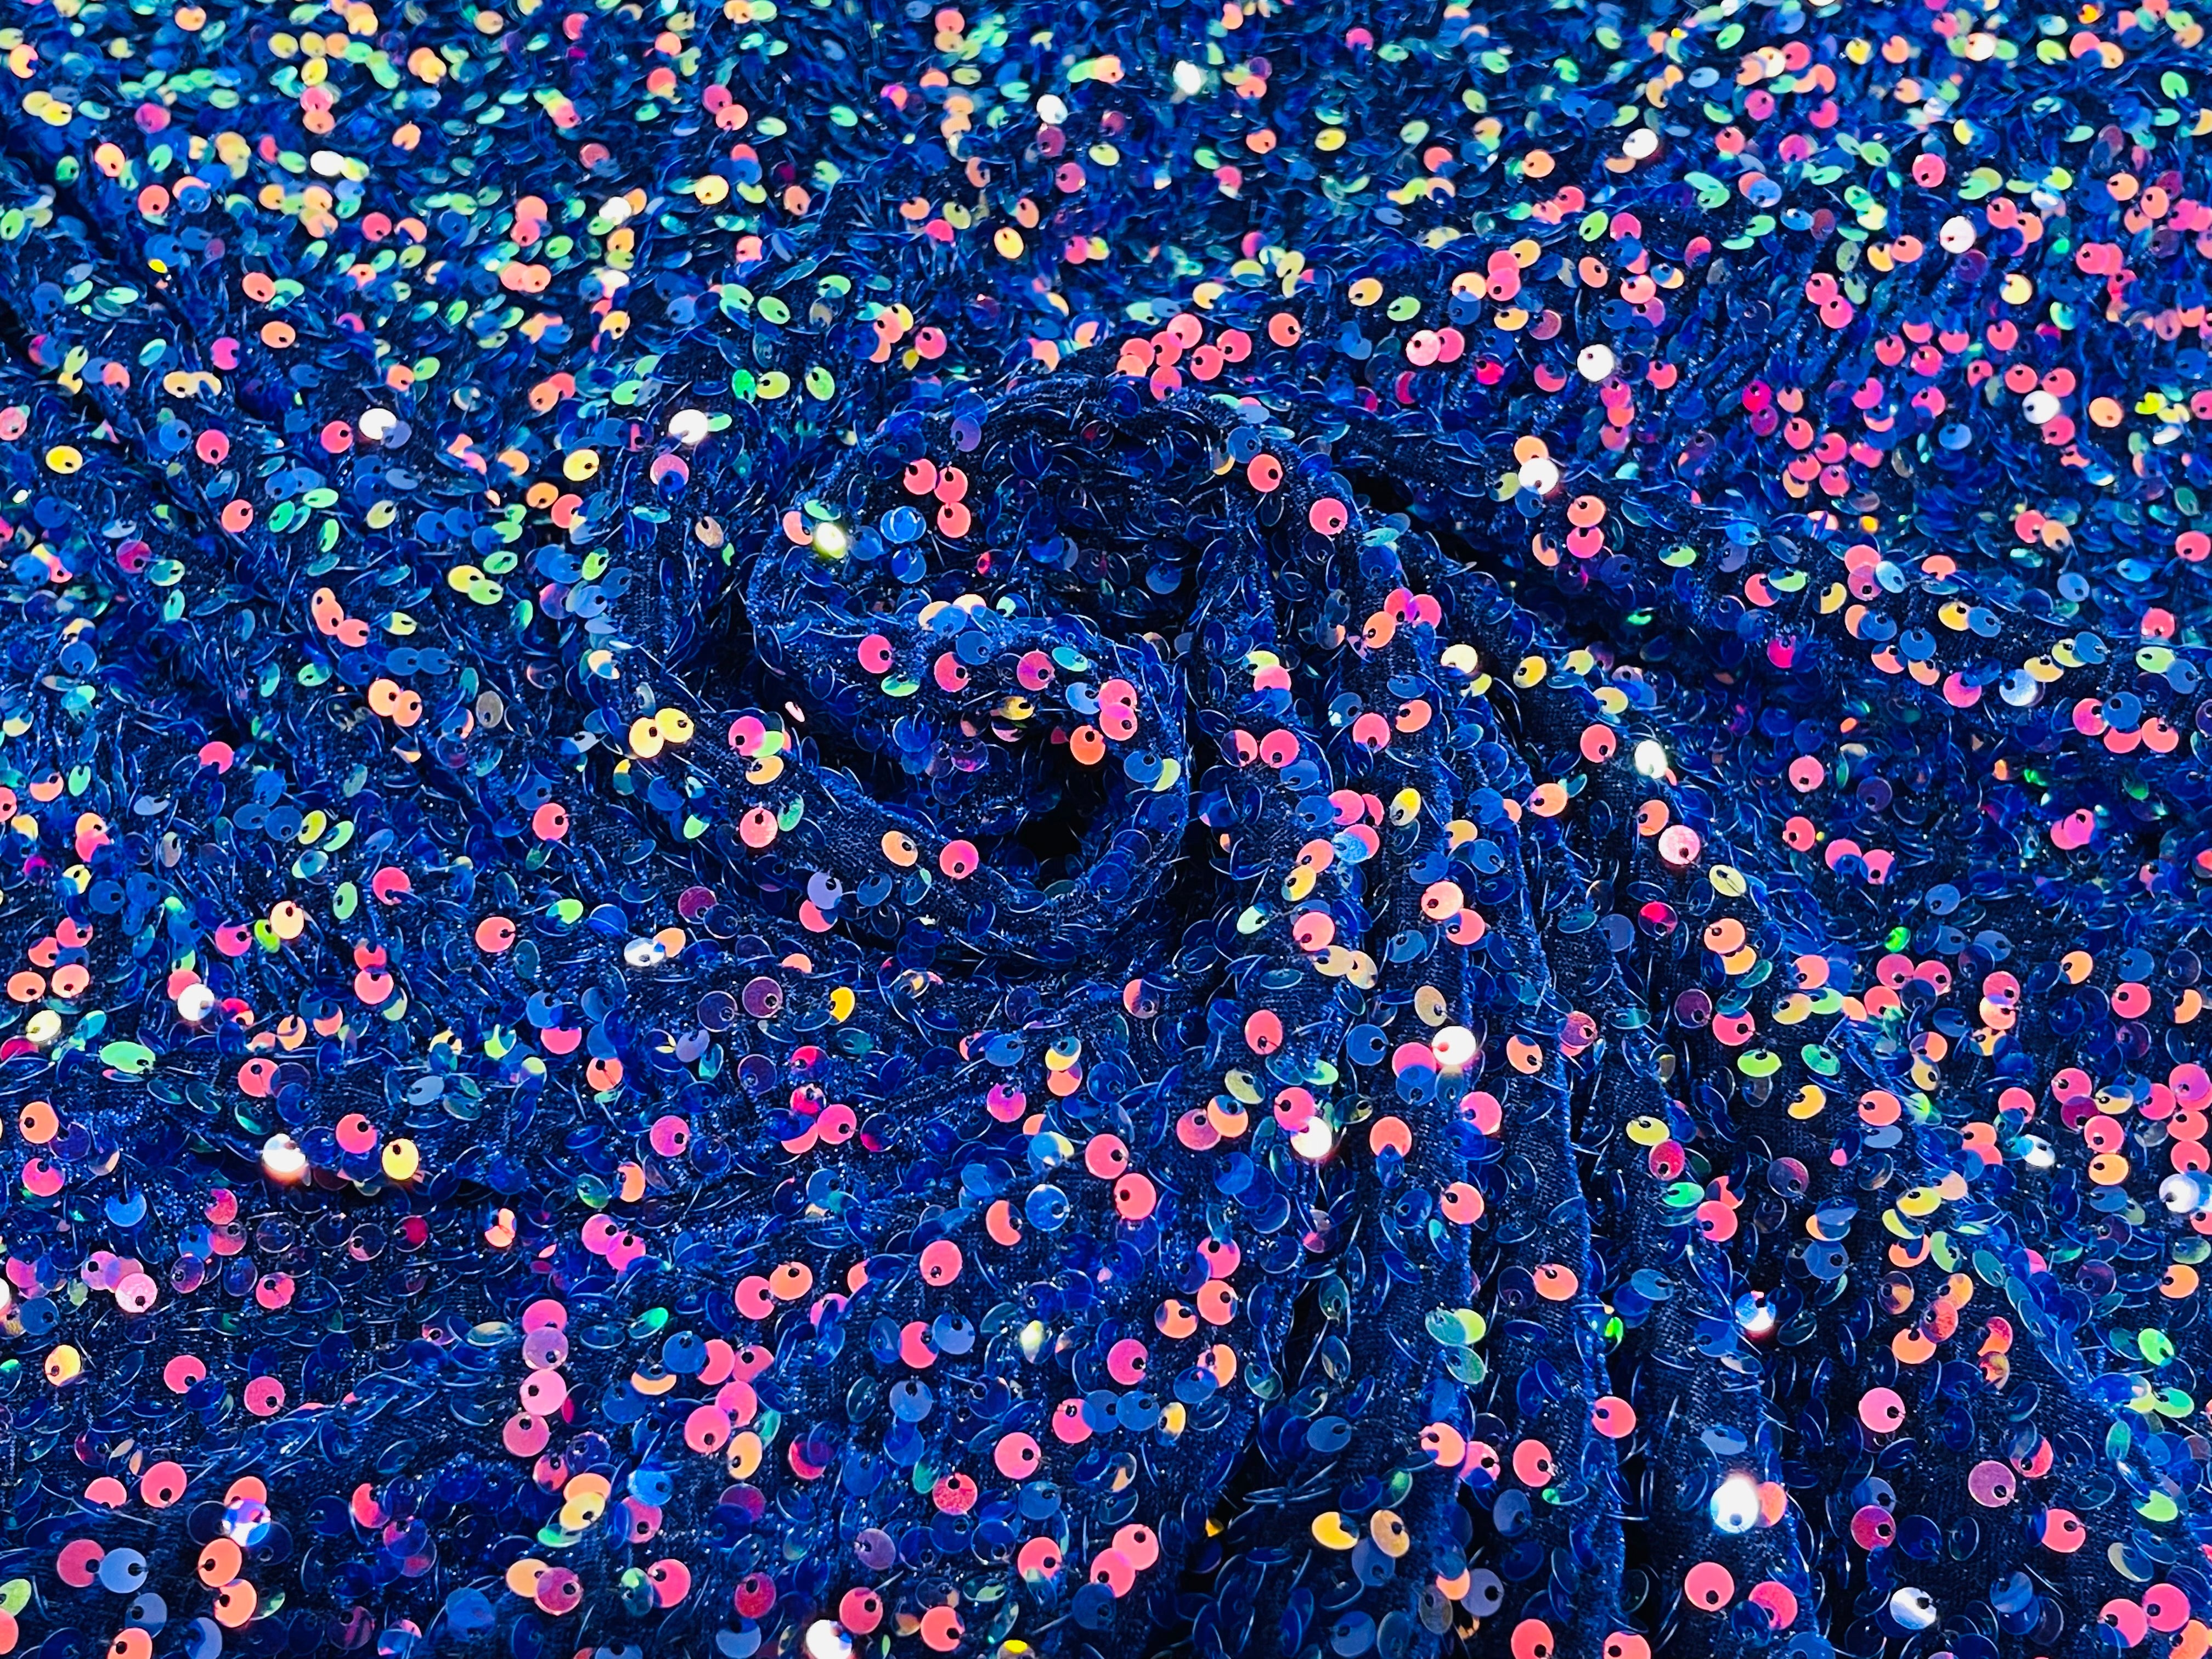 Royal Rainbow on Royal Sequin Velvet Stretch 5mm fabric 58"Wide-Prom-Nightgown fabric- Sold by the yard.